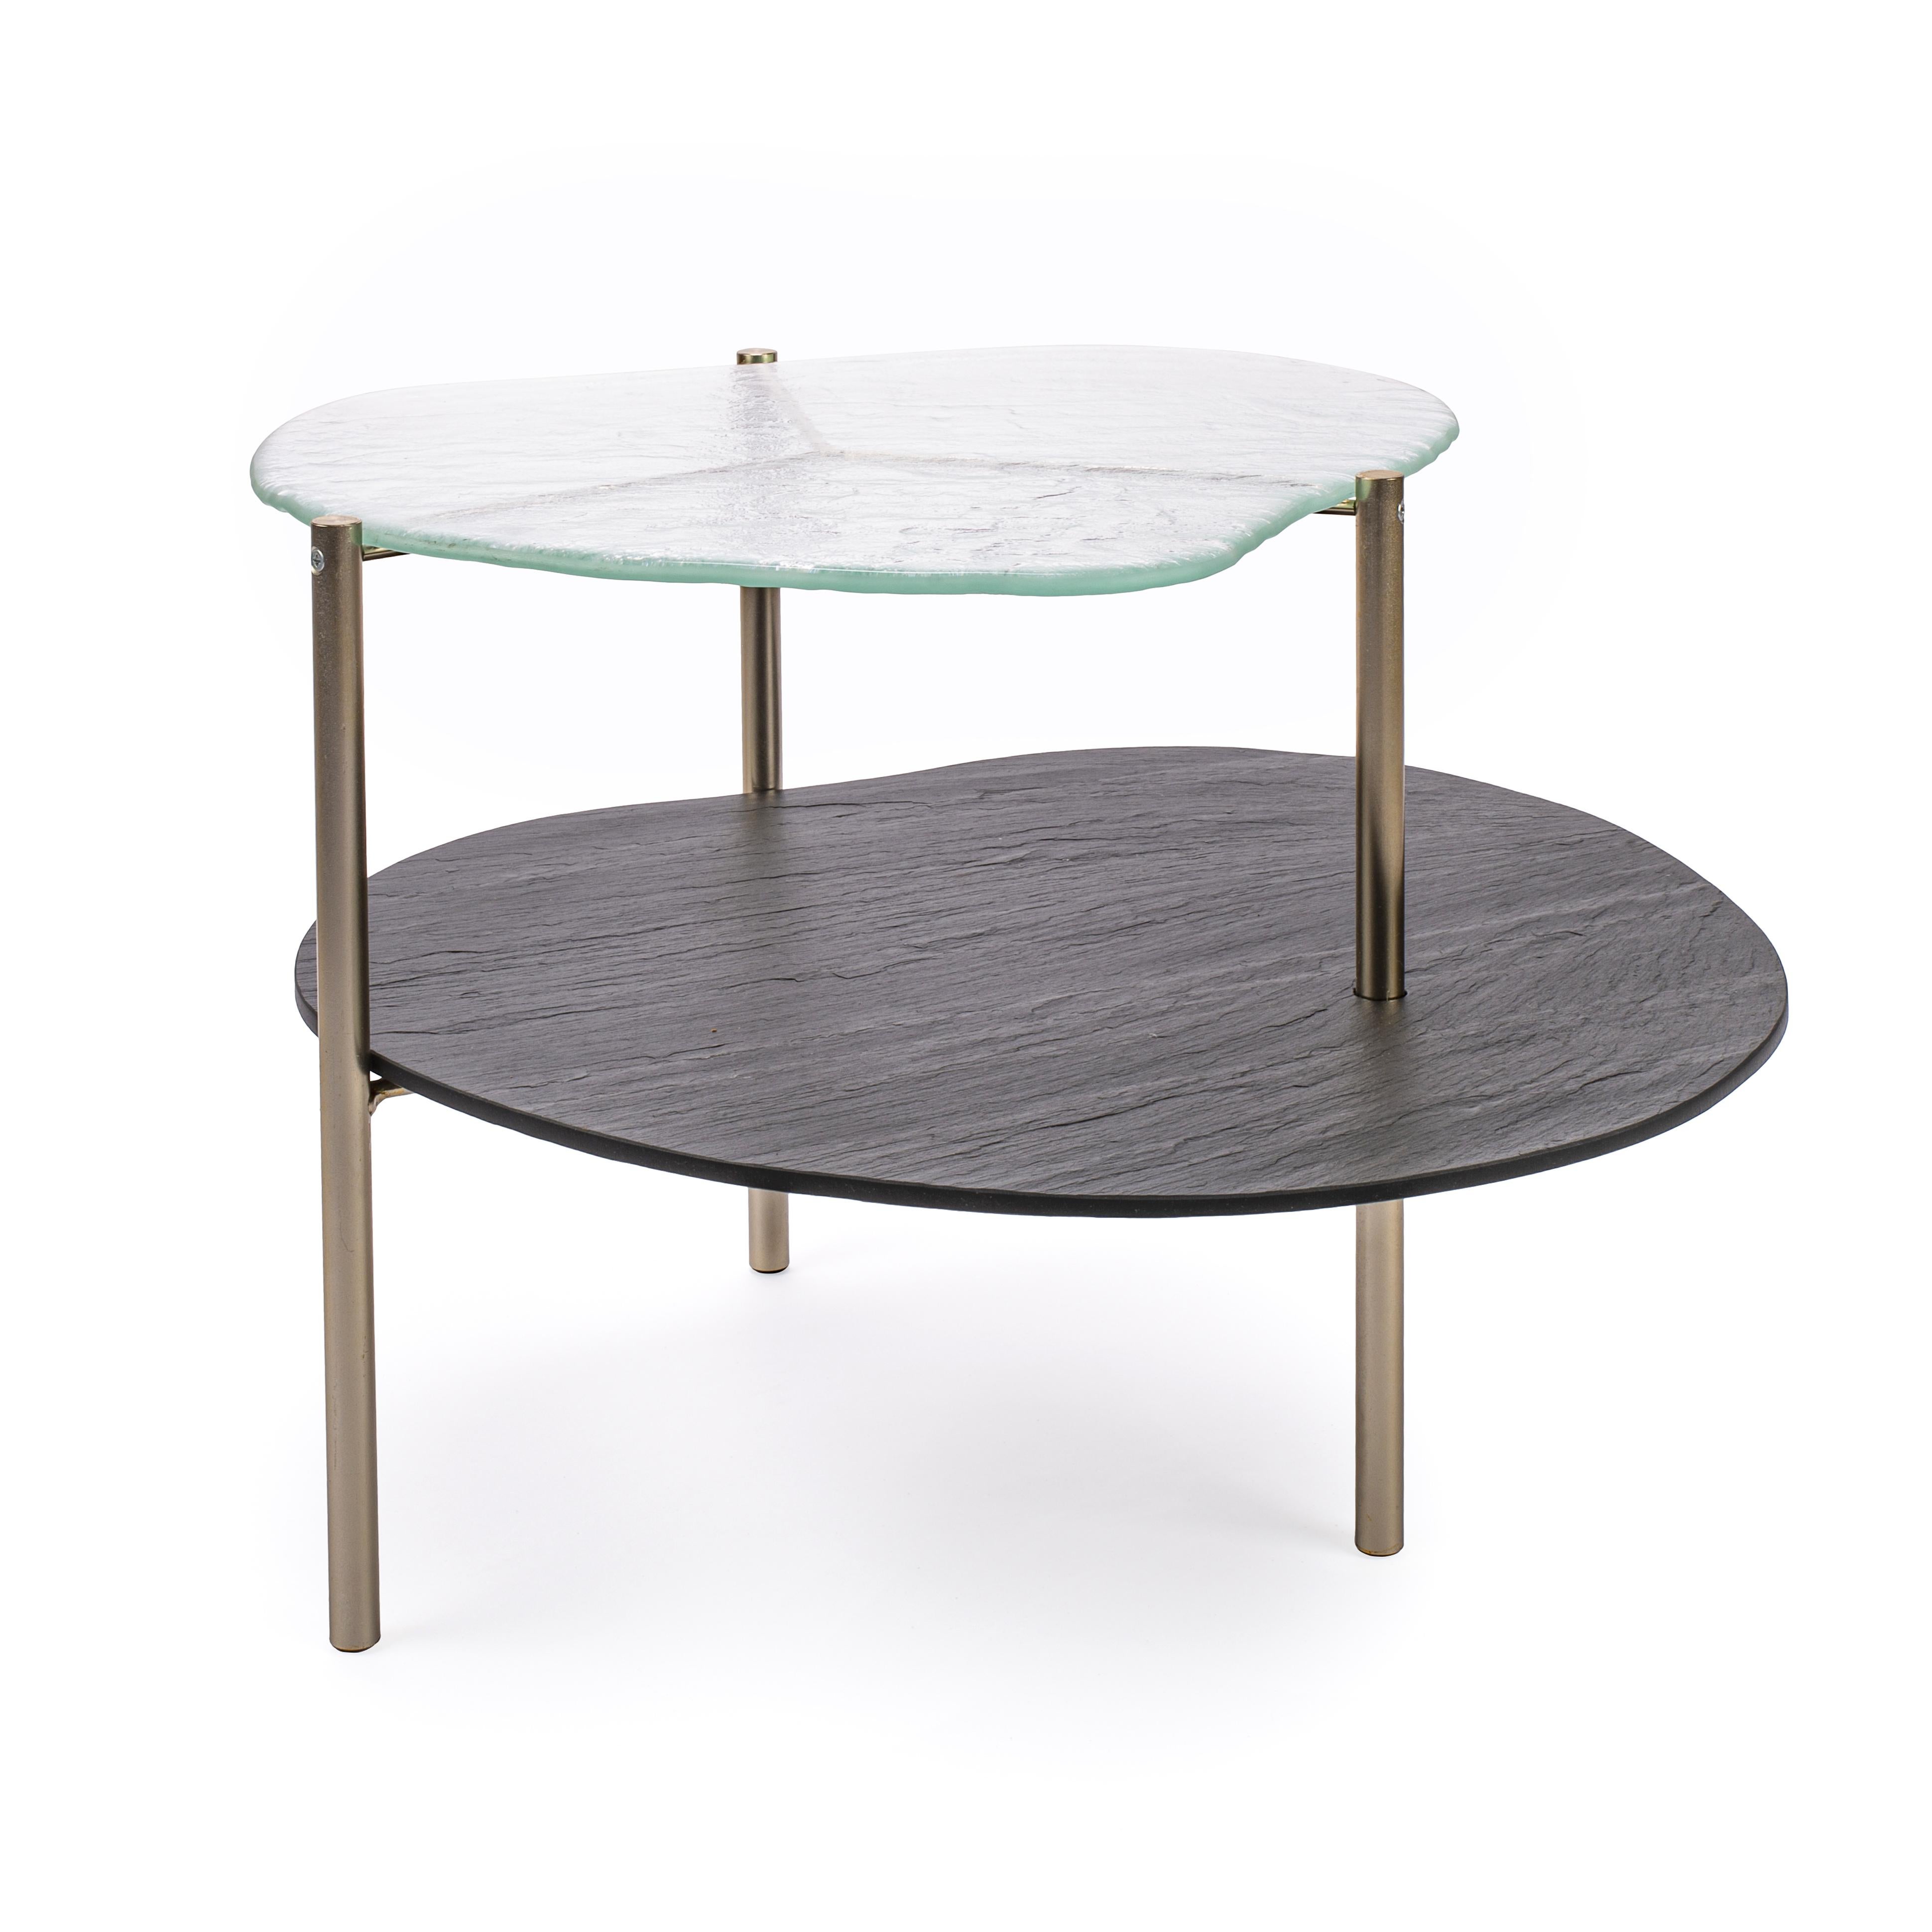 Table no.4 by Anežka Závadová
Materials: Polished slate stone and steel skeleton in satin brass finish
Dimensions: 51.8 x 53.2 x 39.8 cm

Anezka Zavadova has been with Preciosa Lighting, since 2016. As a senior designer in the company’s Middle